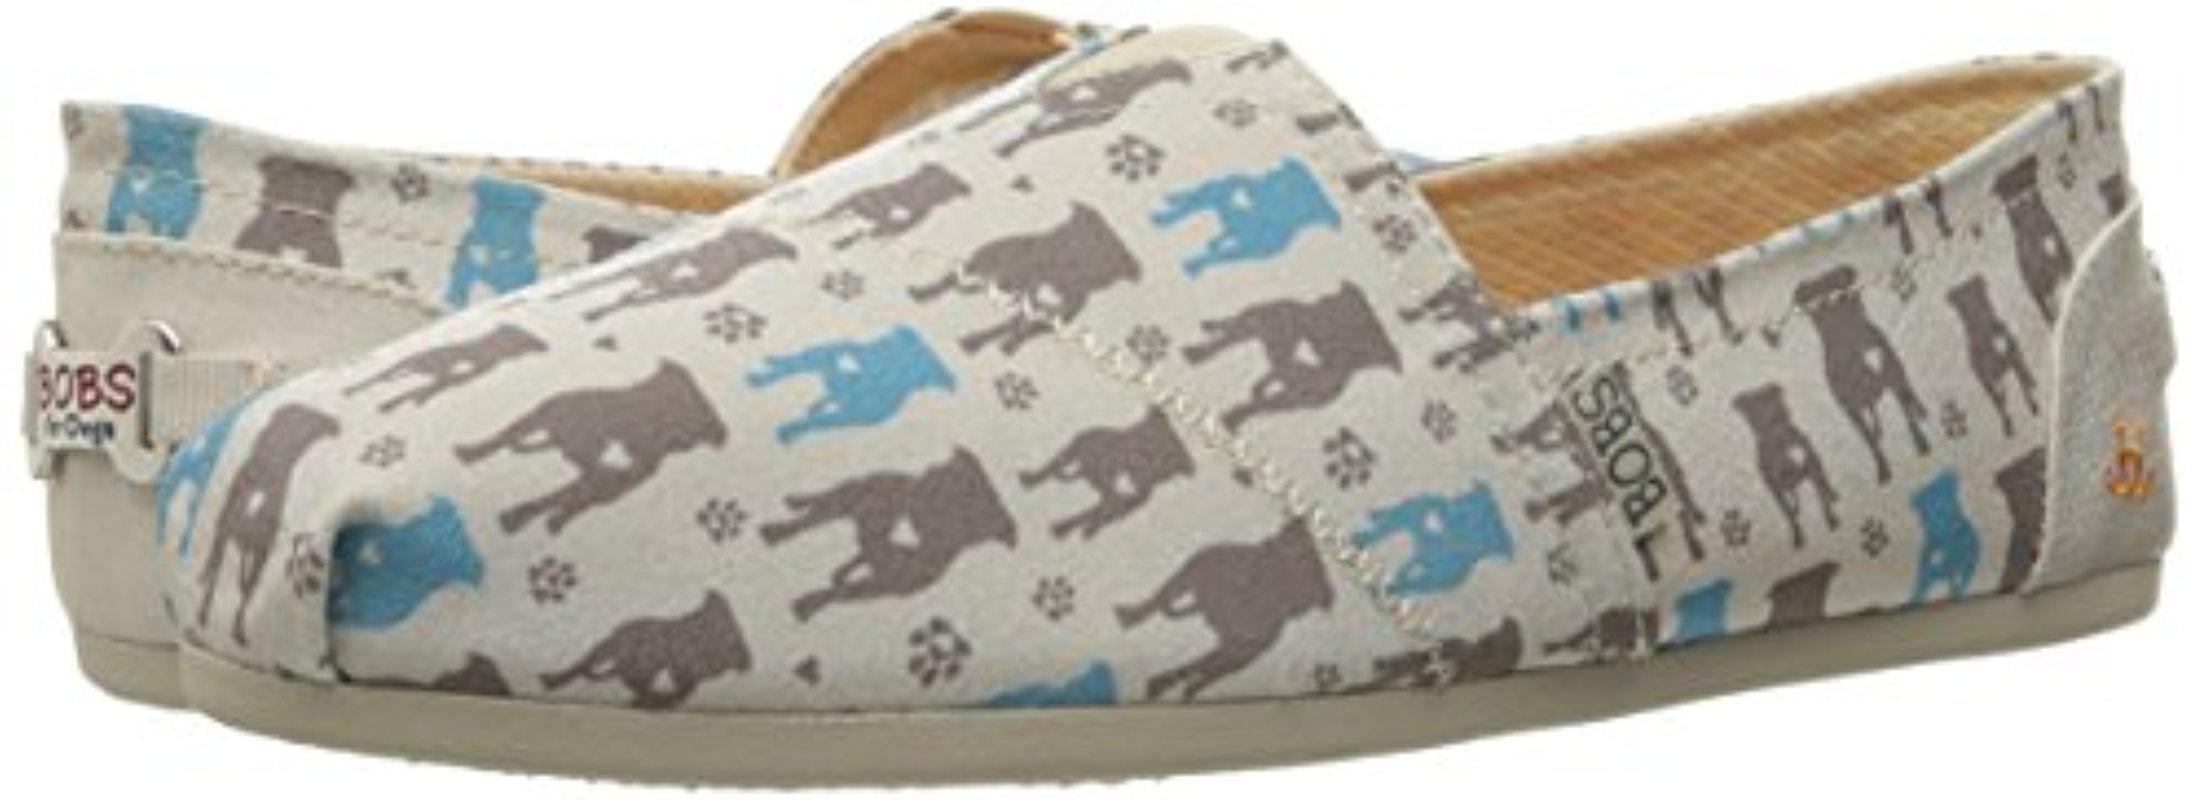 bobs for dogs pitbull shoes